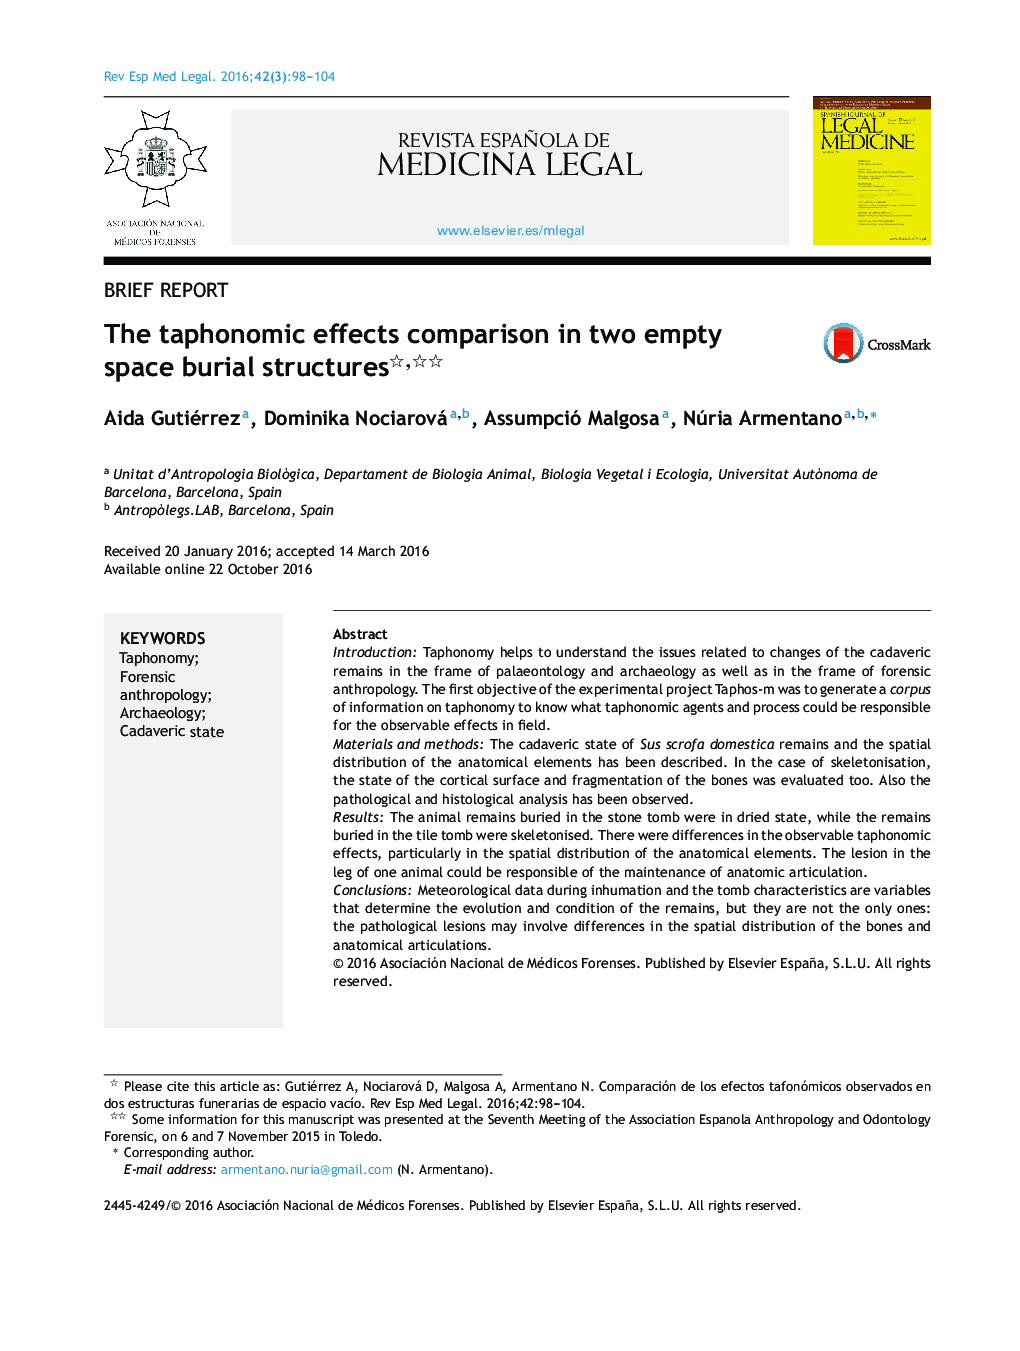 The taphonomic effects comparison in two empty space burial structures